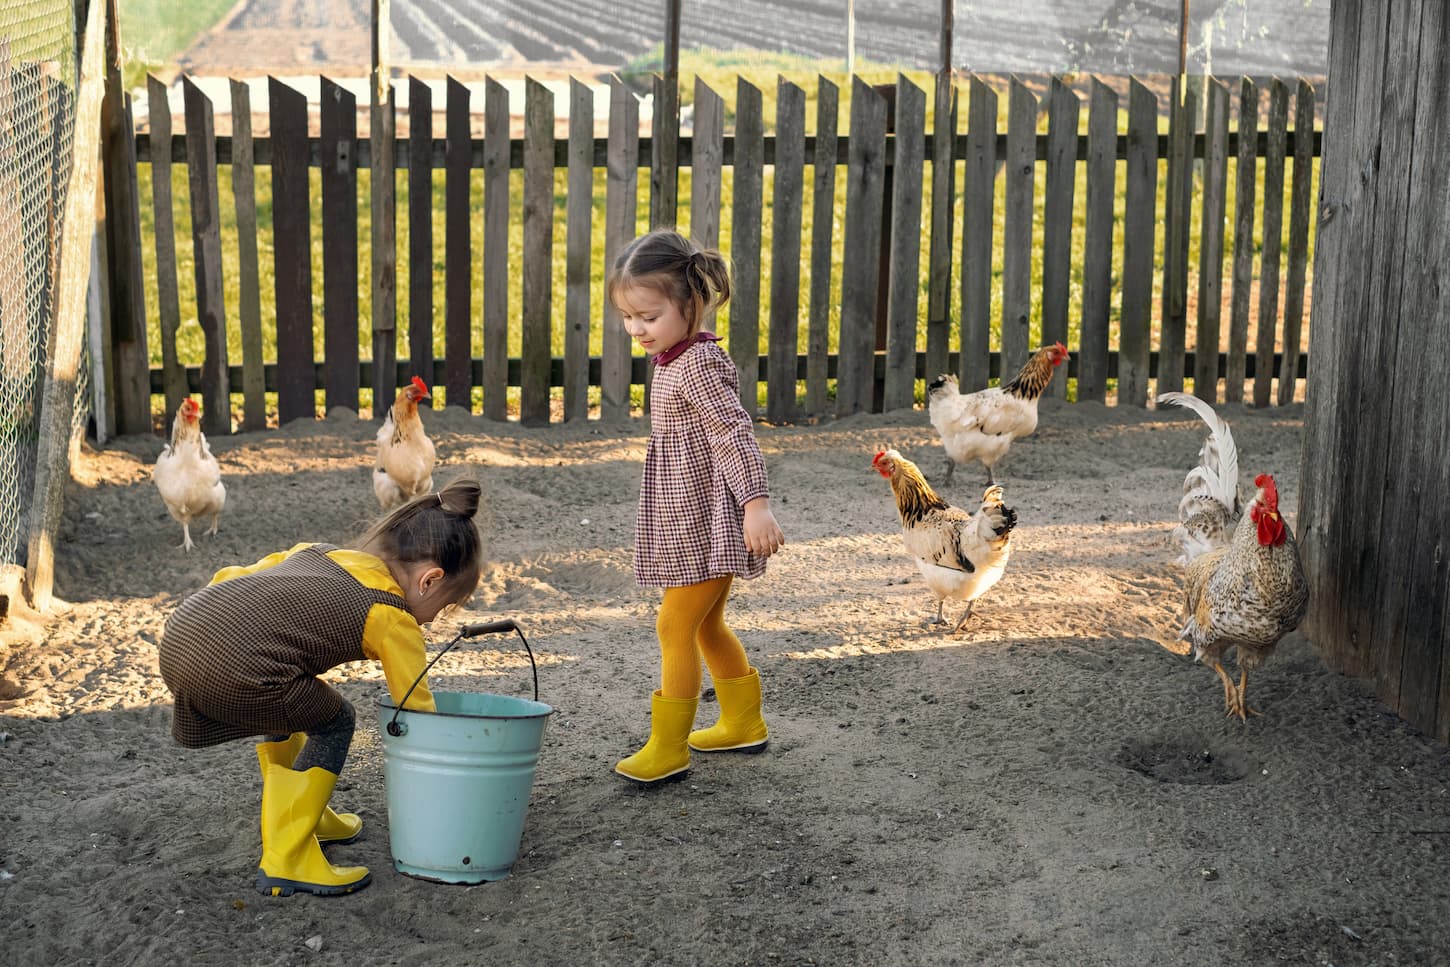 An image of two children are feeding chickens in the village in the backyard.